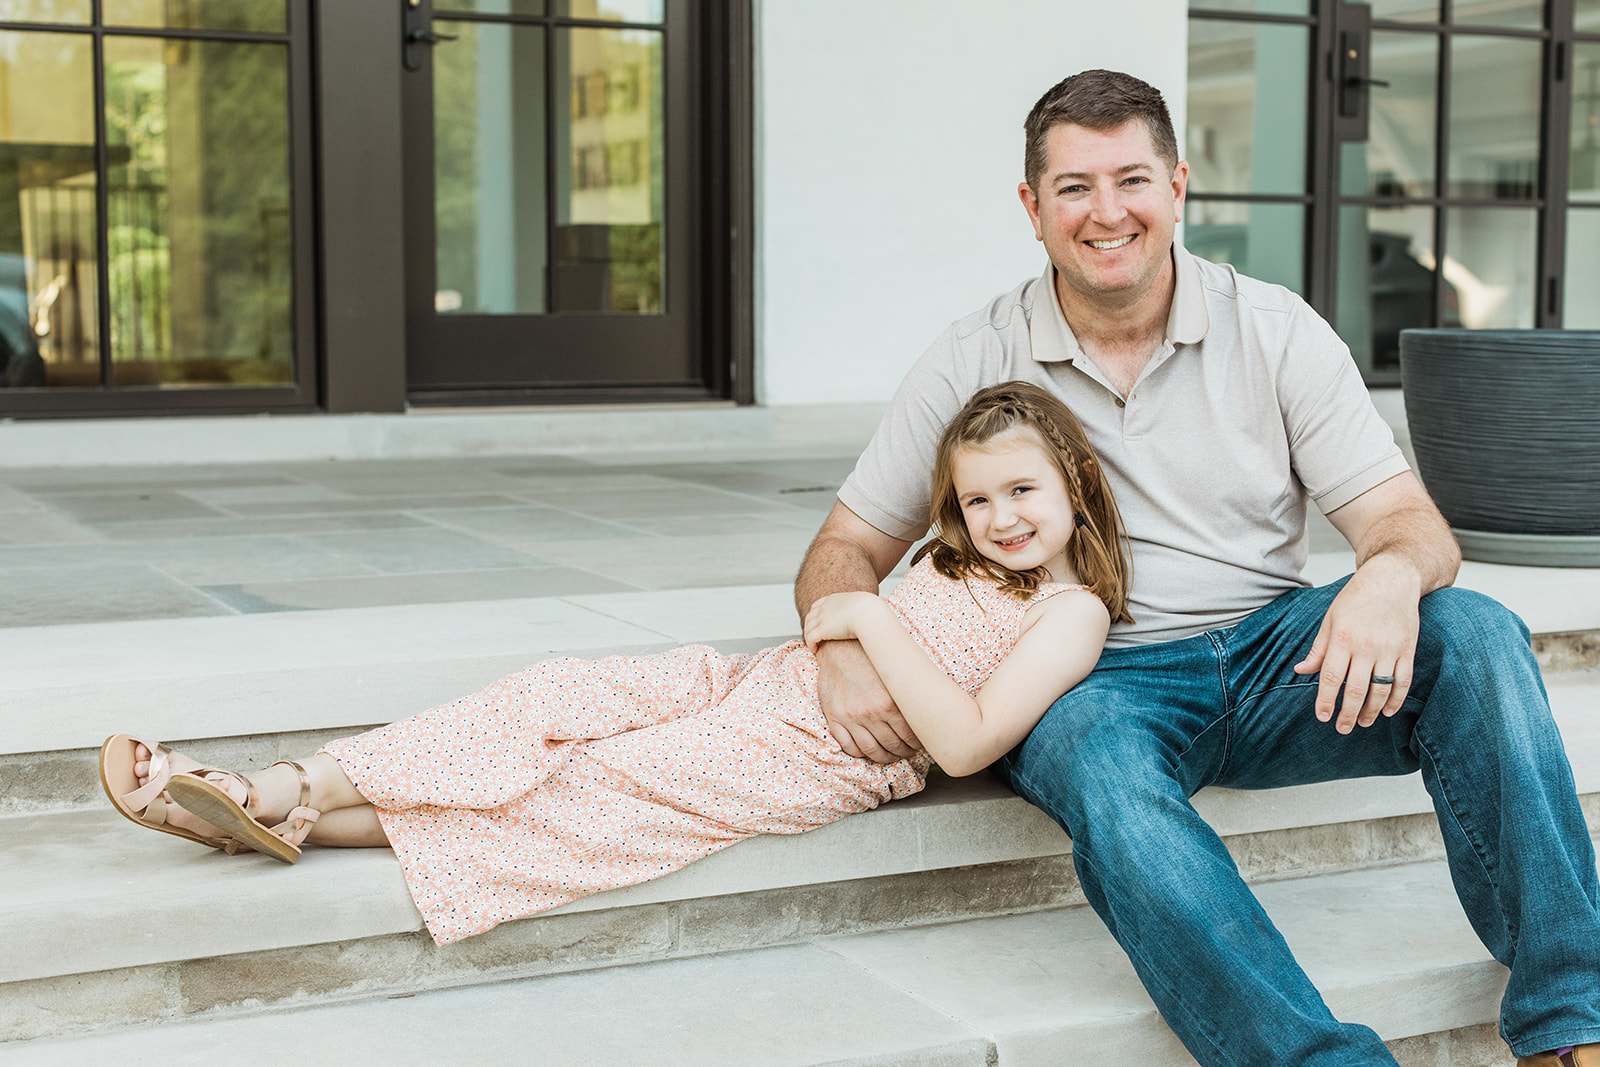 outdoor in-home family session in nashville tennessee. dad and daughter